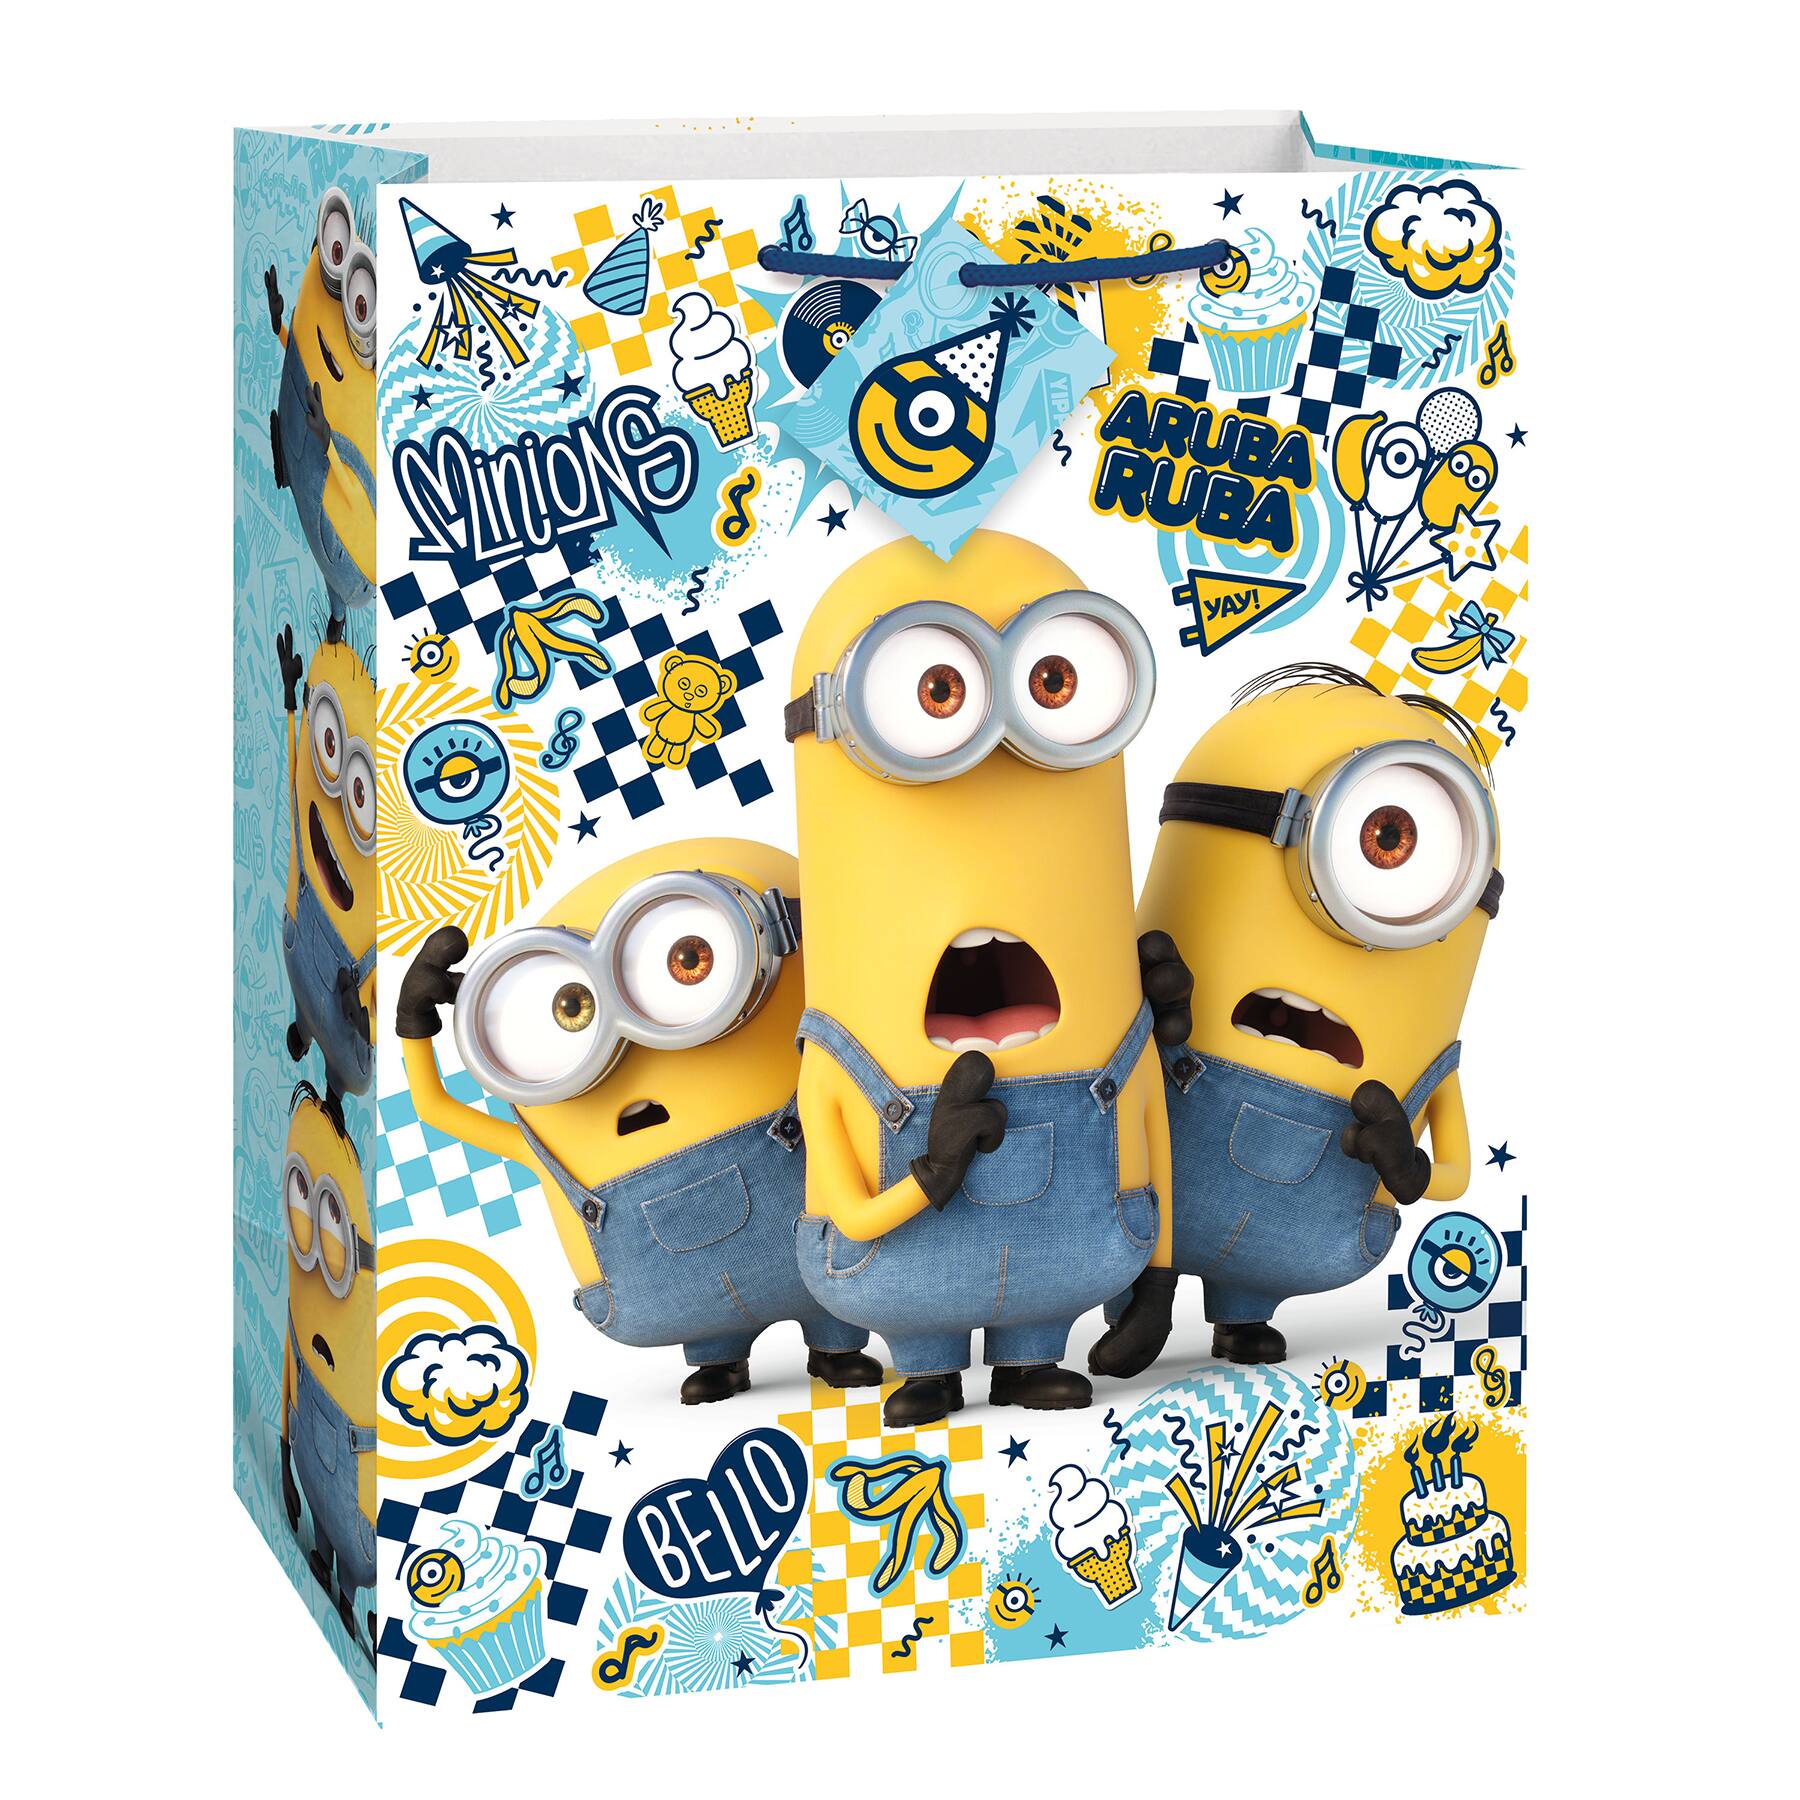 OFFICIAL NEW DESPICABLE ME MINION STORAGE BOX TOY BOX CHILDRENS BEDROOM GIFTS 